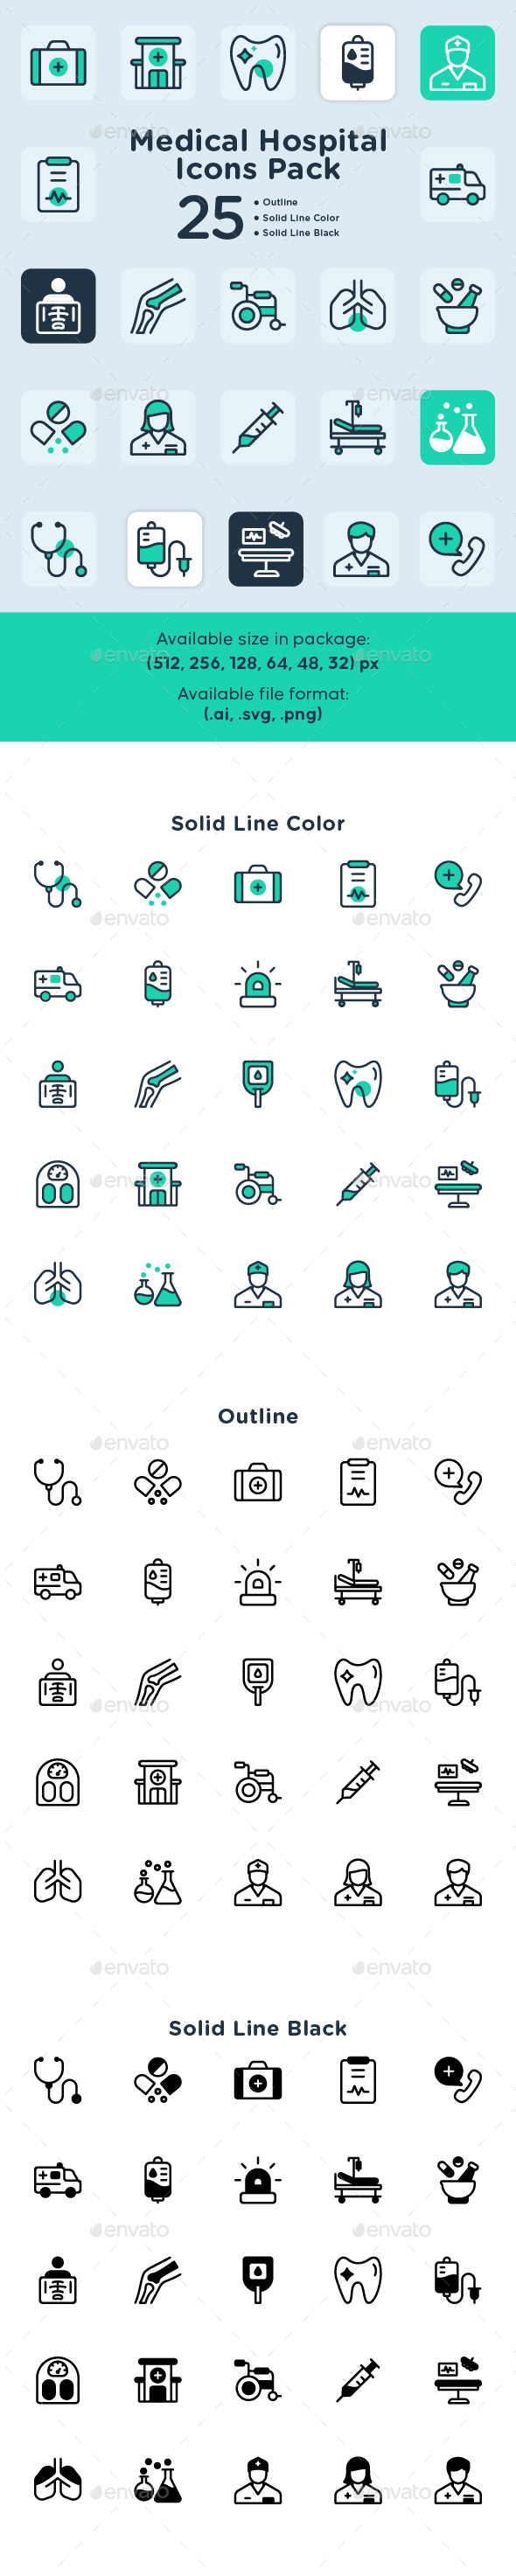 [DOWNLOAD]Medical Hospital Icons Pack